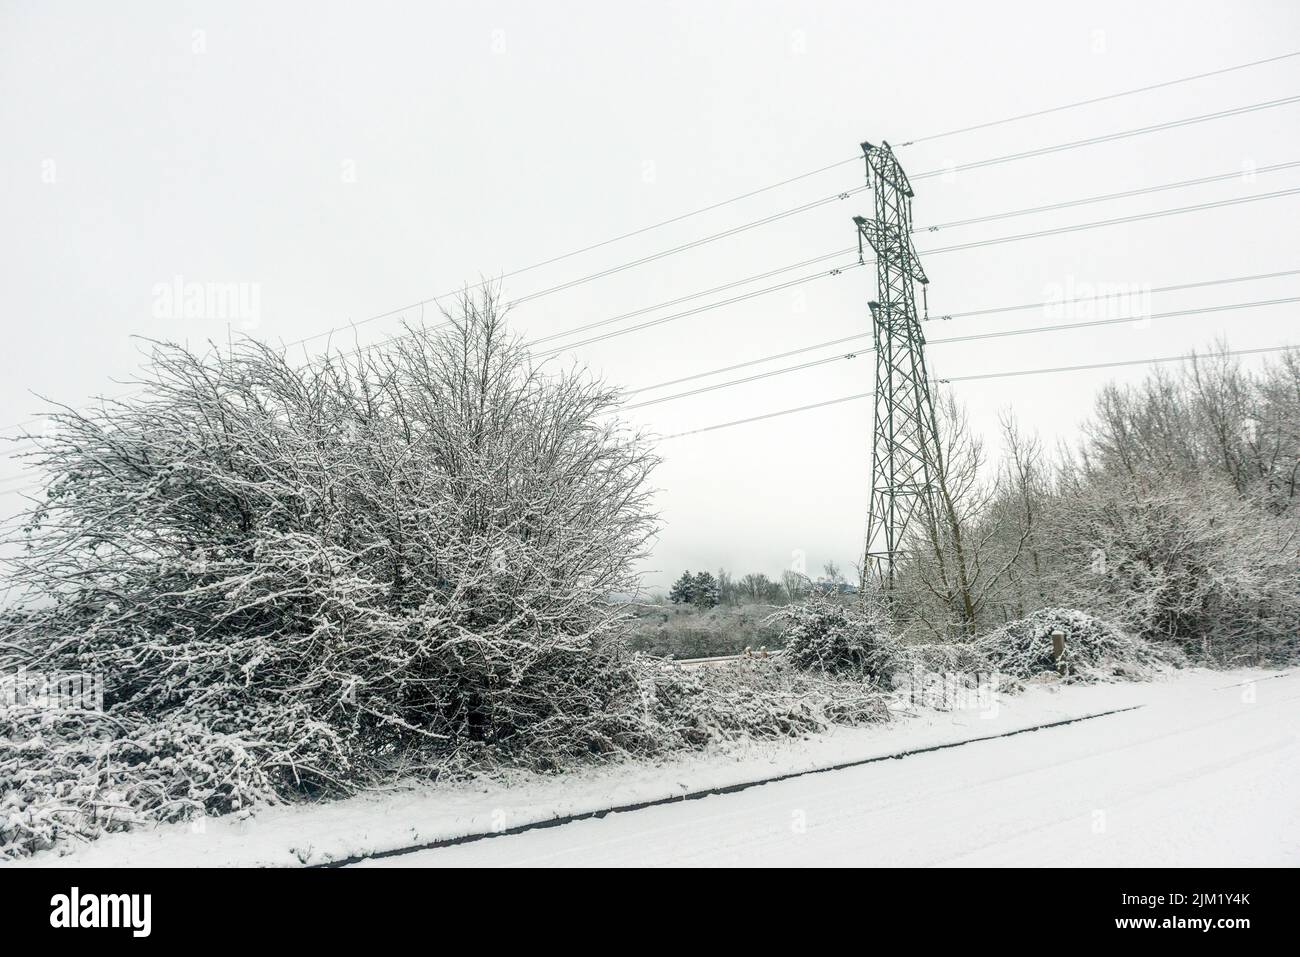 Electricity pylons in winter snow Stock Photo